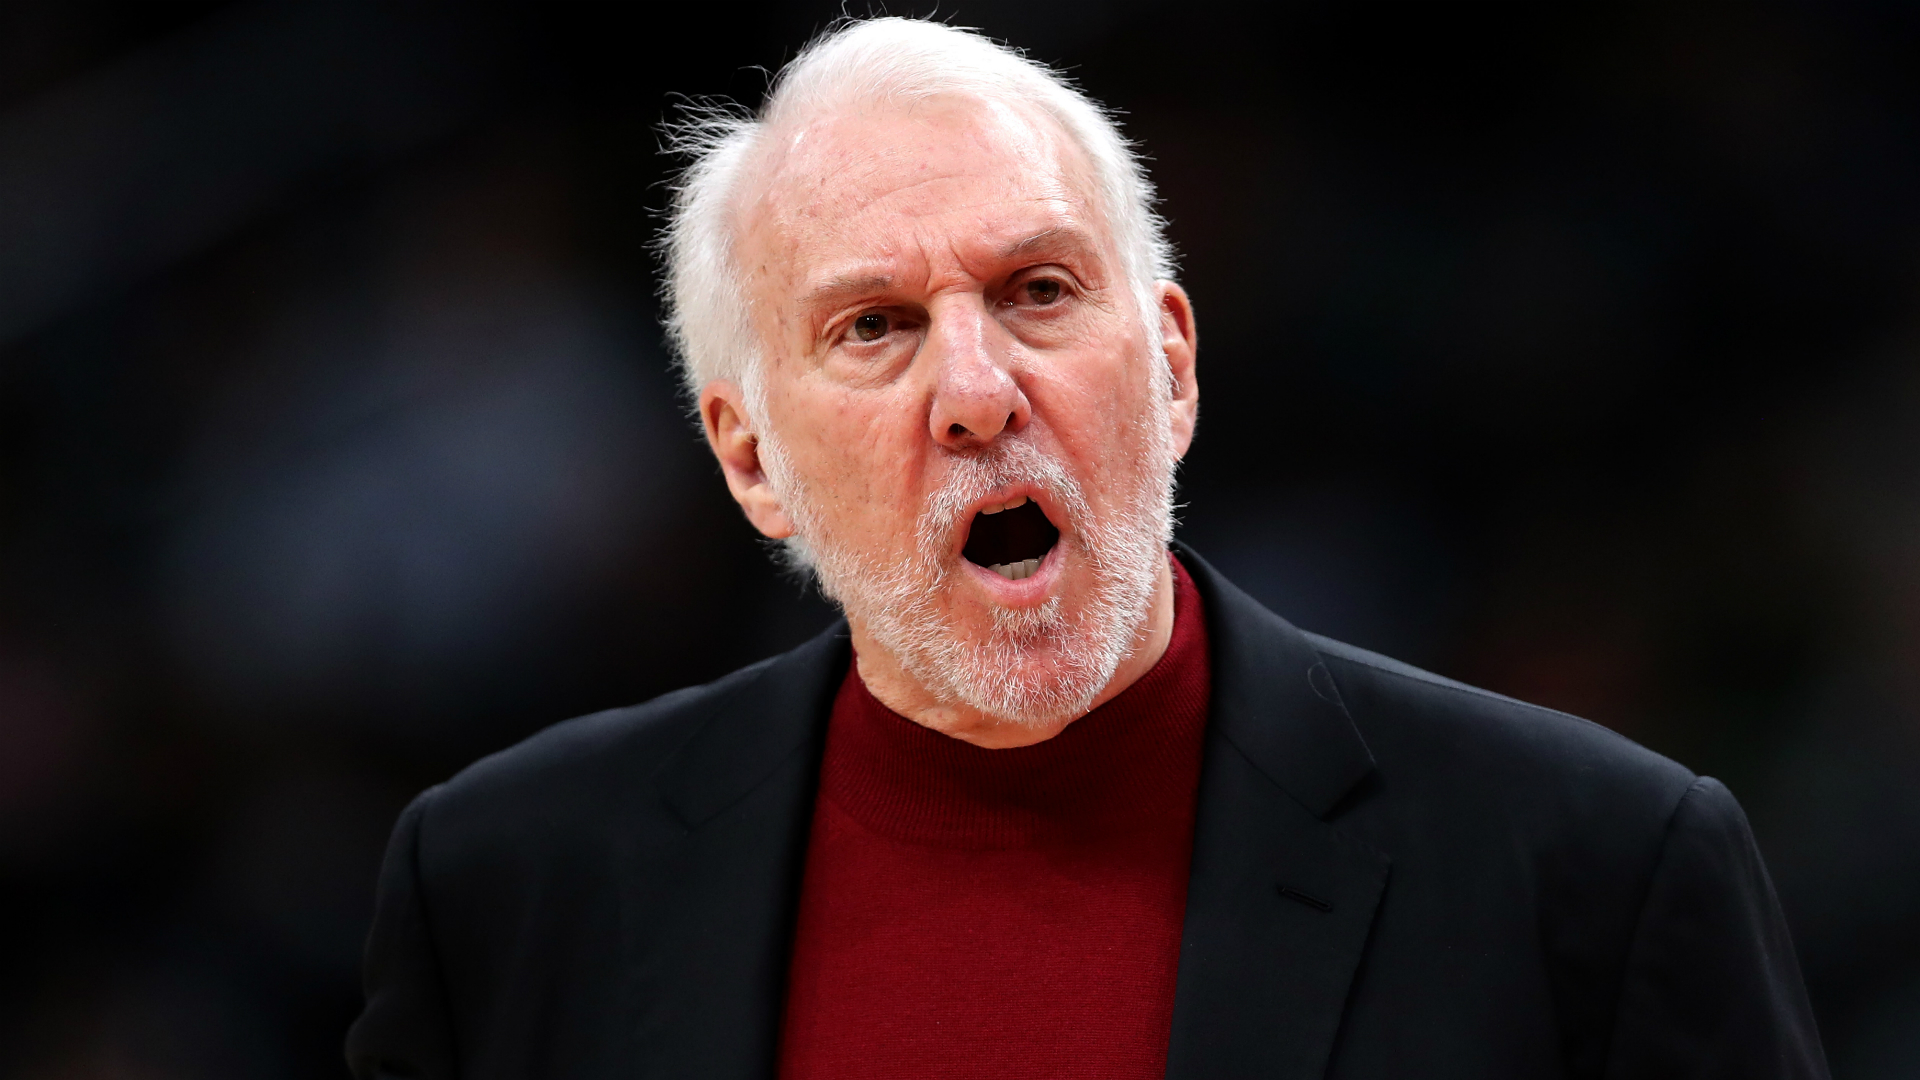 Gregg Popovich launched a scathing critique of US president Donald Trump amid nationwide unrest in the wake of George Floyd's death.